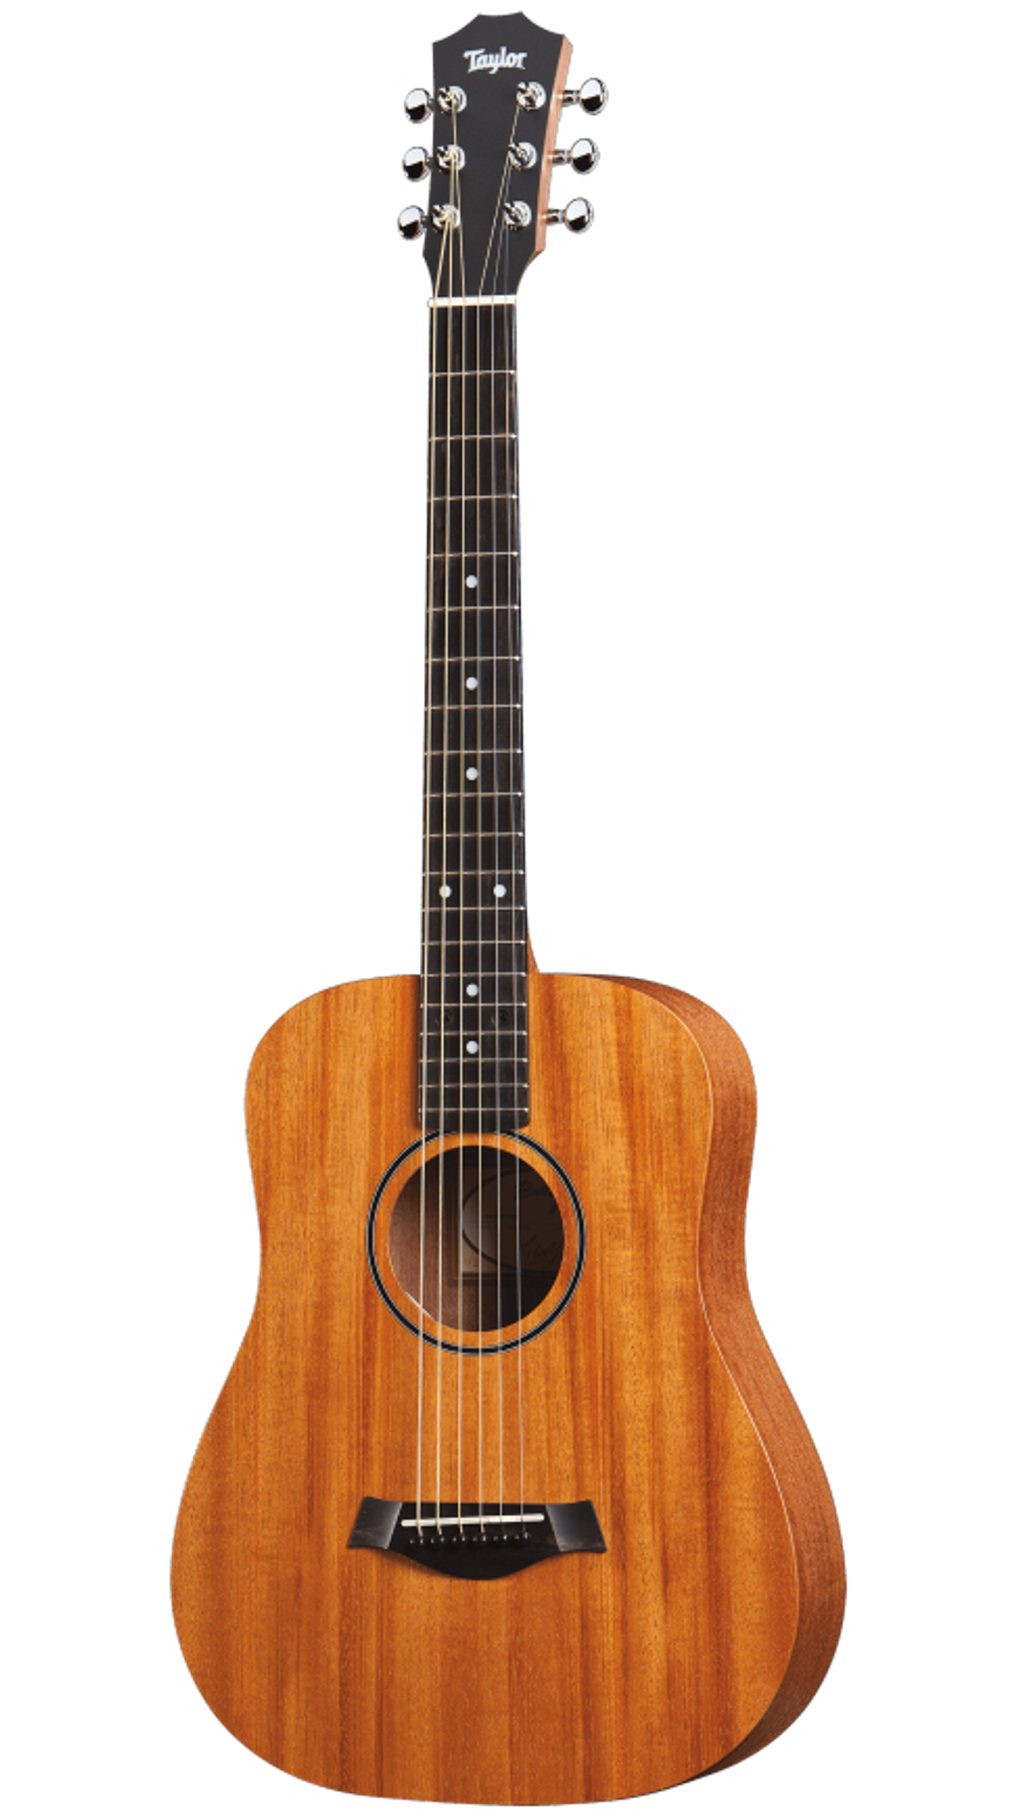 Taylor-BT2-front.png